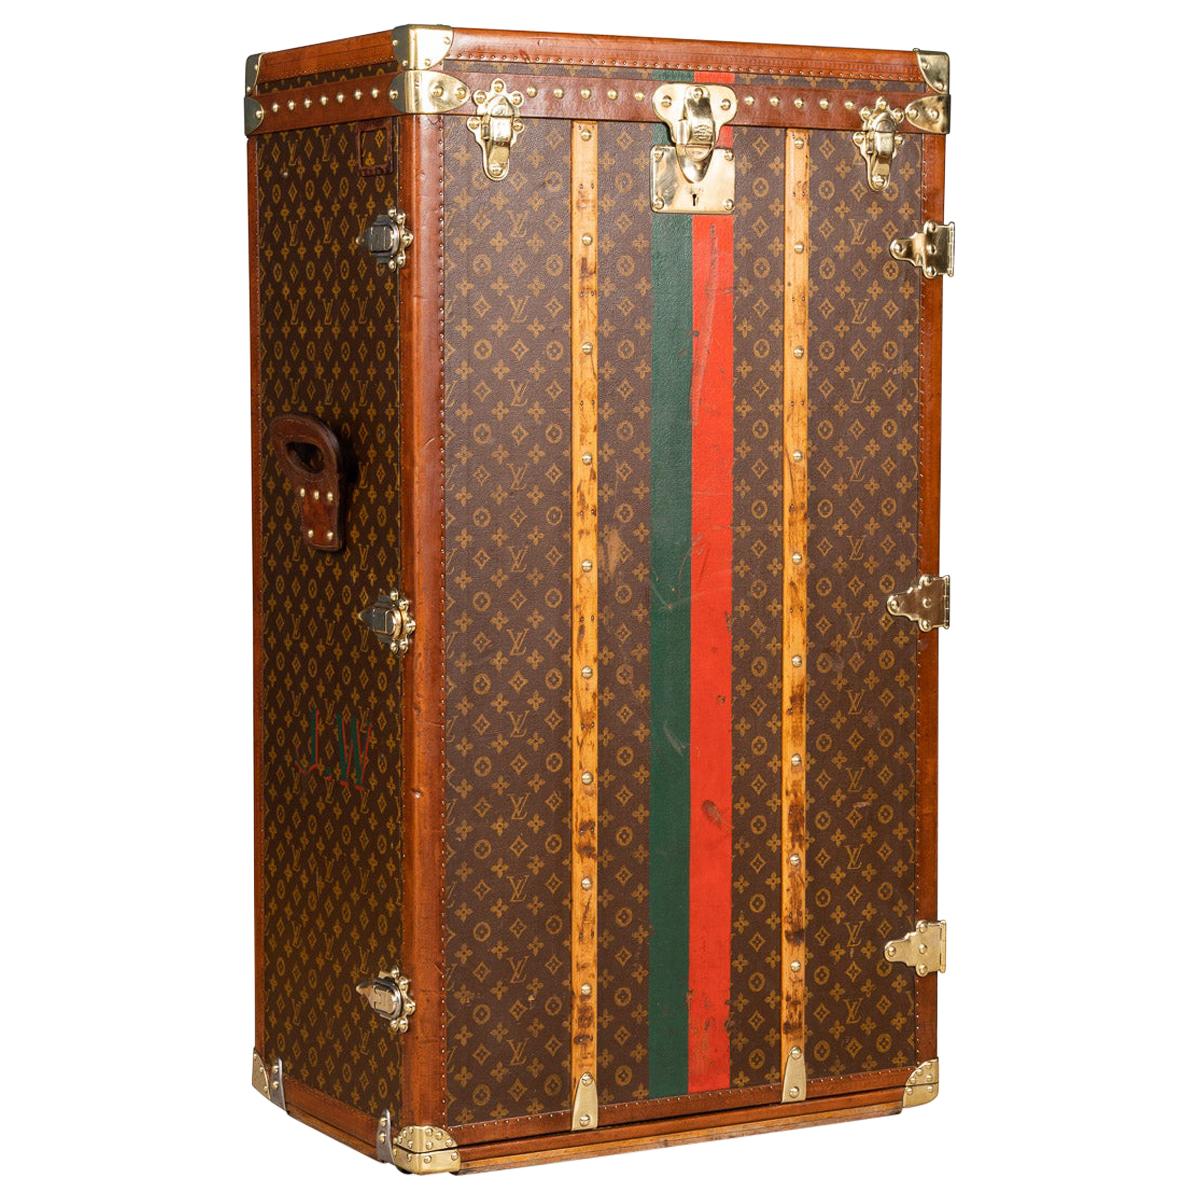 20th Century Louis Vuitton "Lily Pons" Trunk in Monogrammed Canvas, circa 1940